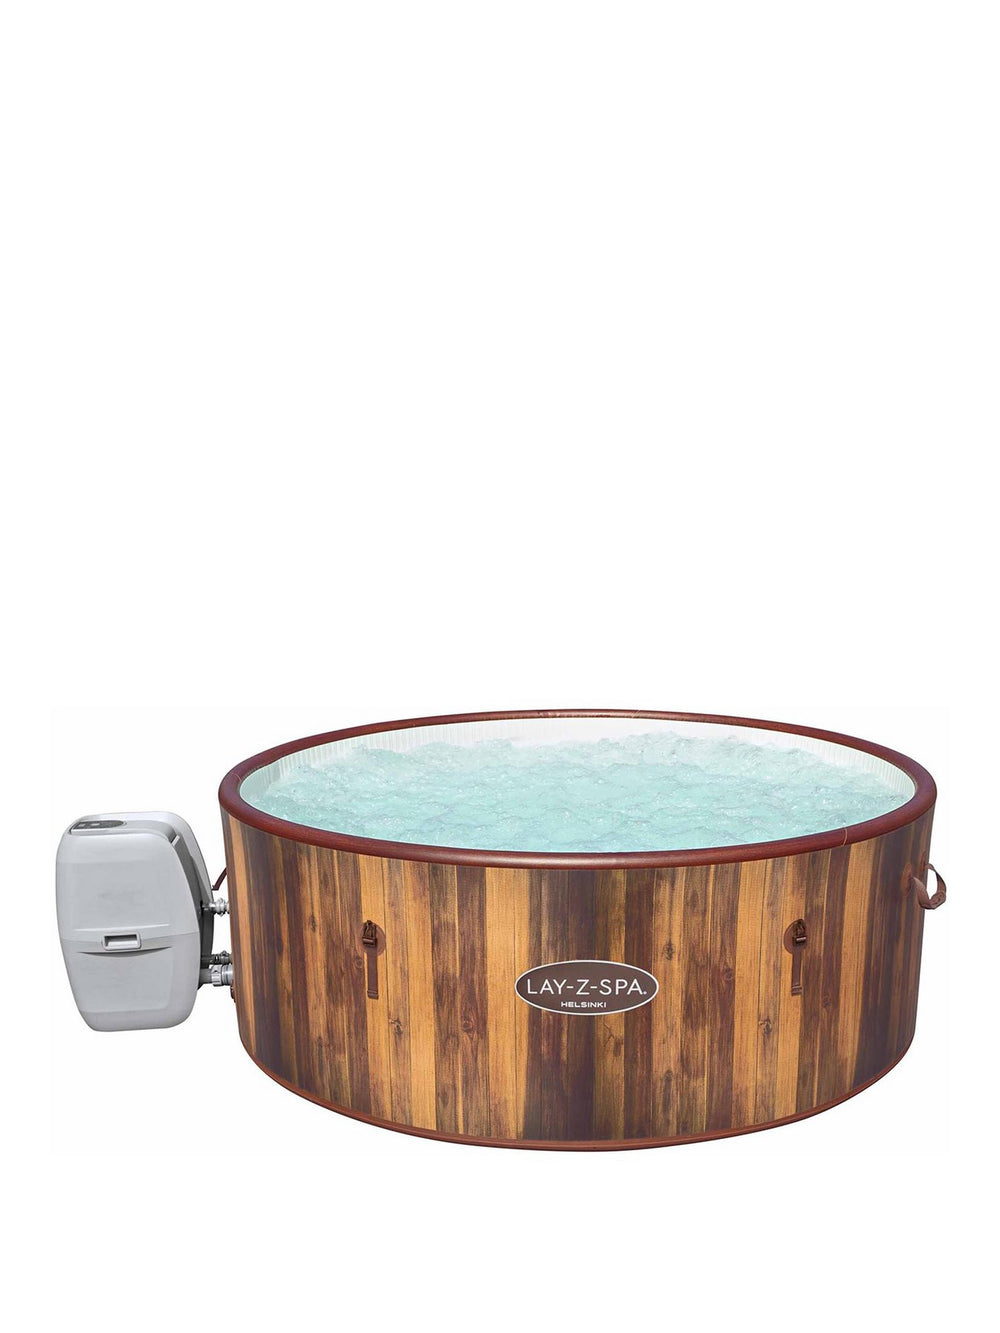 Lay-Z-Spa Helsinki AirJet Spa Hot Tub (For 5-7 Adults)